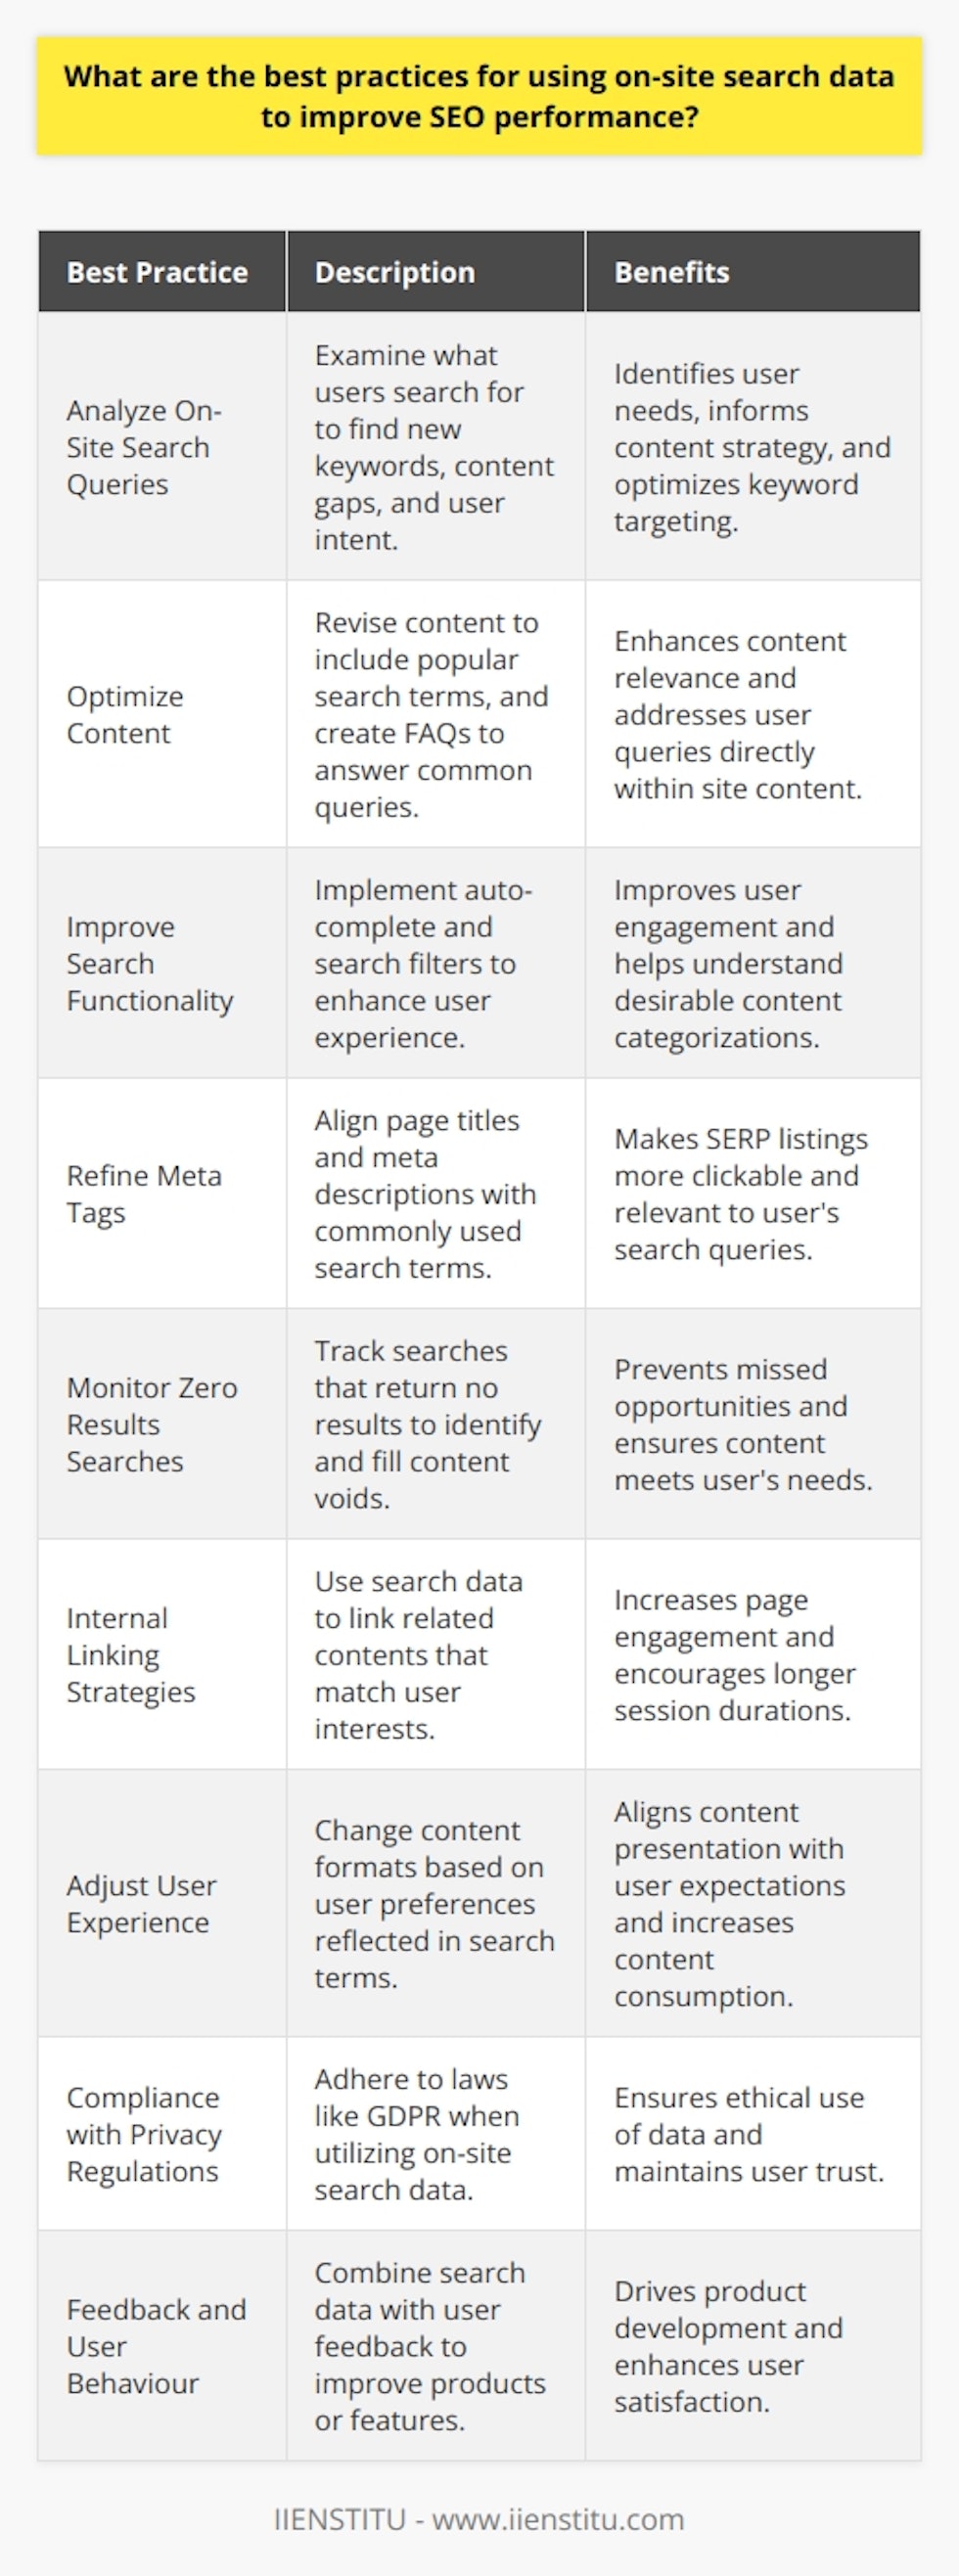 Leveraging on-site search data offers a hidden goldmine for SEO experts looking to hone their strategies and deliver content that aligns with user intent. The insights gleaned from what users are searching for on your site can inform a plethora of SEO tasks, from keyword optimization to content creation.To effectively use on-site search data, here are some of the best practices:### Analyze On-Site Search QueriesUnderstanding what users are looking for once they land on your site can be incredibly insightful. By analyzing on-site search queries, you can discover:- **New Keywords:** Identify long-tail keywords that you might not have targeted but are highly relevant to your users.- **Content Gaps:** Find out what existing content isn’t visible or doesn’t exist based on what users are searching for. - **User Intent:** Understand the context and intent behind queries to better align your content with user needs.### Optimize Content Based on Search DataOnce you have a list of popular on-site search terms, optimize existing content or create new content around these queries. This can involve:- Revising titles, headings, and descriptions to include popular search terms.- Updating old posts to ensure they address the queries users are searching for on your site.- Creating FAQ sections that directly answer common search queries.### Improve Your On-Site Search FunctionalityA responsive and efficient on-site search function can enhance the user experience and contribute to SEO in several ways:- **Auto-Complete Features:** Implement auto-complete predictions to help users find content faster.- **Search Filters:** Provide filters to allow users to refine search results, which can help in understanding what kinds of categorizations or attributes are most valued.### Refine Meta Tags Based on User SearchesIf particular search terms are frequently used on your site, it's an indication that users consider them significant. Reflect this in your page titles and meta descriptions to make them more clickable in SERPs.### Monitor Search Zero ResultsPay attention to user searches that result in zero results; these are opportunities to identify content voids on your website. Create content that fills these gaps to cater to your users’ needs.### Use Data for Internal Linking StrategiesUse the search terms data to develop an internal linking strategy that promotes other related content based on what the user is interested in. This can lead to increased engagement and session duration.### Adjust User Experience Based on Search BehaviorAnalyzing on-site search data can reveal much about how users prefer to interact with your content. If you notice, for example, that search terms are oriented around video content yet your site is dominated by text, it may be time to pivot and produce more multimedia content.### Stay Compliant with Privacy RegulationsEnsure that while collecting and using on-site search data, you’re complying with privacy laws such as GDPR, if applicable. Respect user anonymity and only use aggregate data to inform your SEO practices.### Act on Feedback and User BehaviourIn some cases, on-site search data can complement user feedback. If users are searching for features or products not yet offered, this data combined with direct feedback can make a strong case for developing those offerings.In conclusion, on-site search data can be a significant asset to your SEO strategy. By closely monitoring this data, you can uncover invaluable insights that allow for the crafting of pinpointed content strategies, improving both the user experience and your site’s relevance in the eyes of search engines. Always remember, the goal is not just to attract visitors, but also to provide them with the content they're seeking as efficiently and effectively as possible.